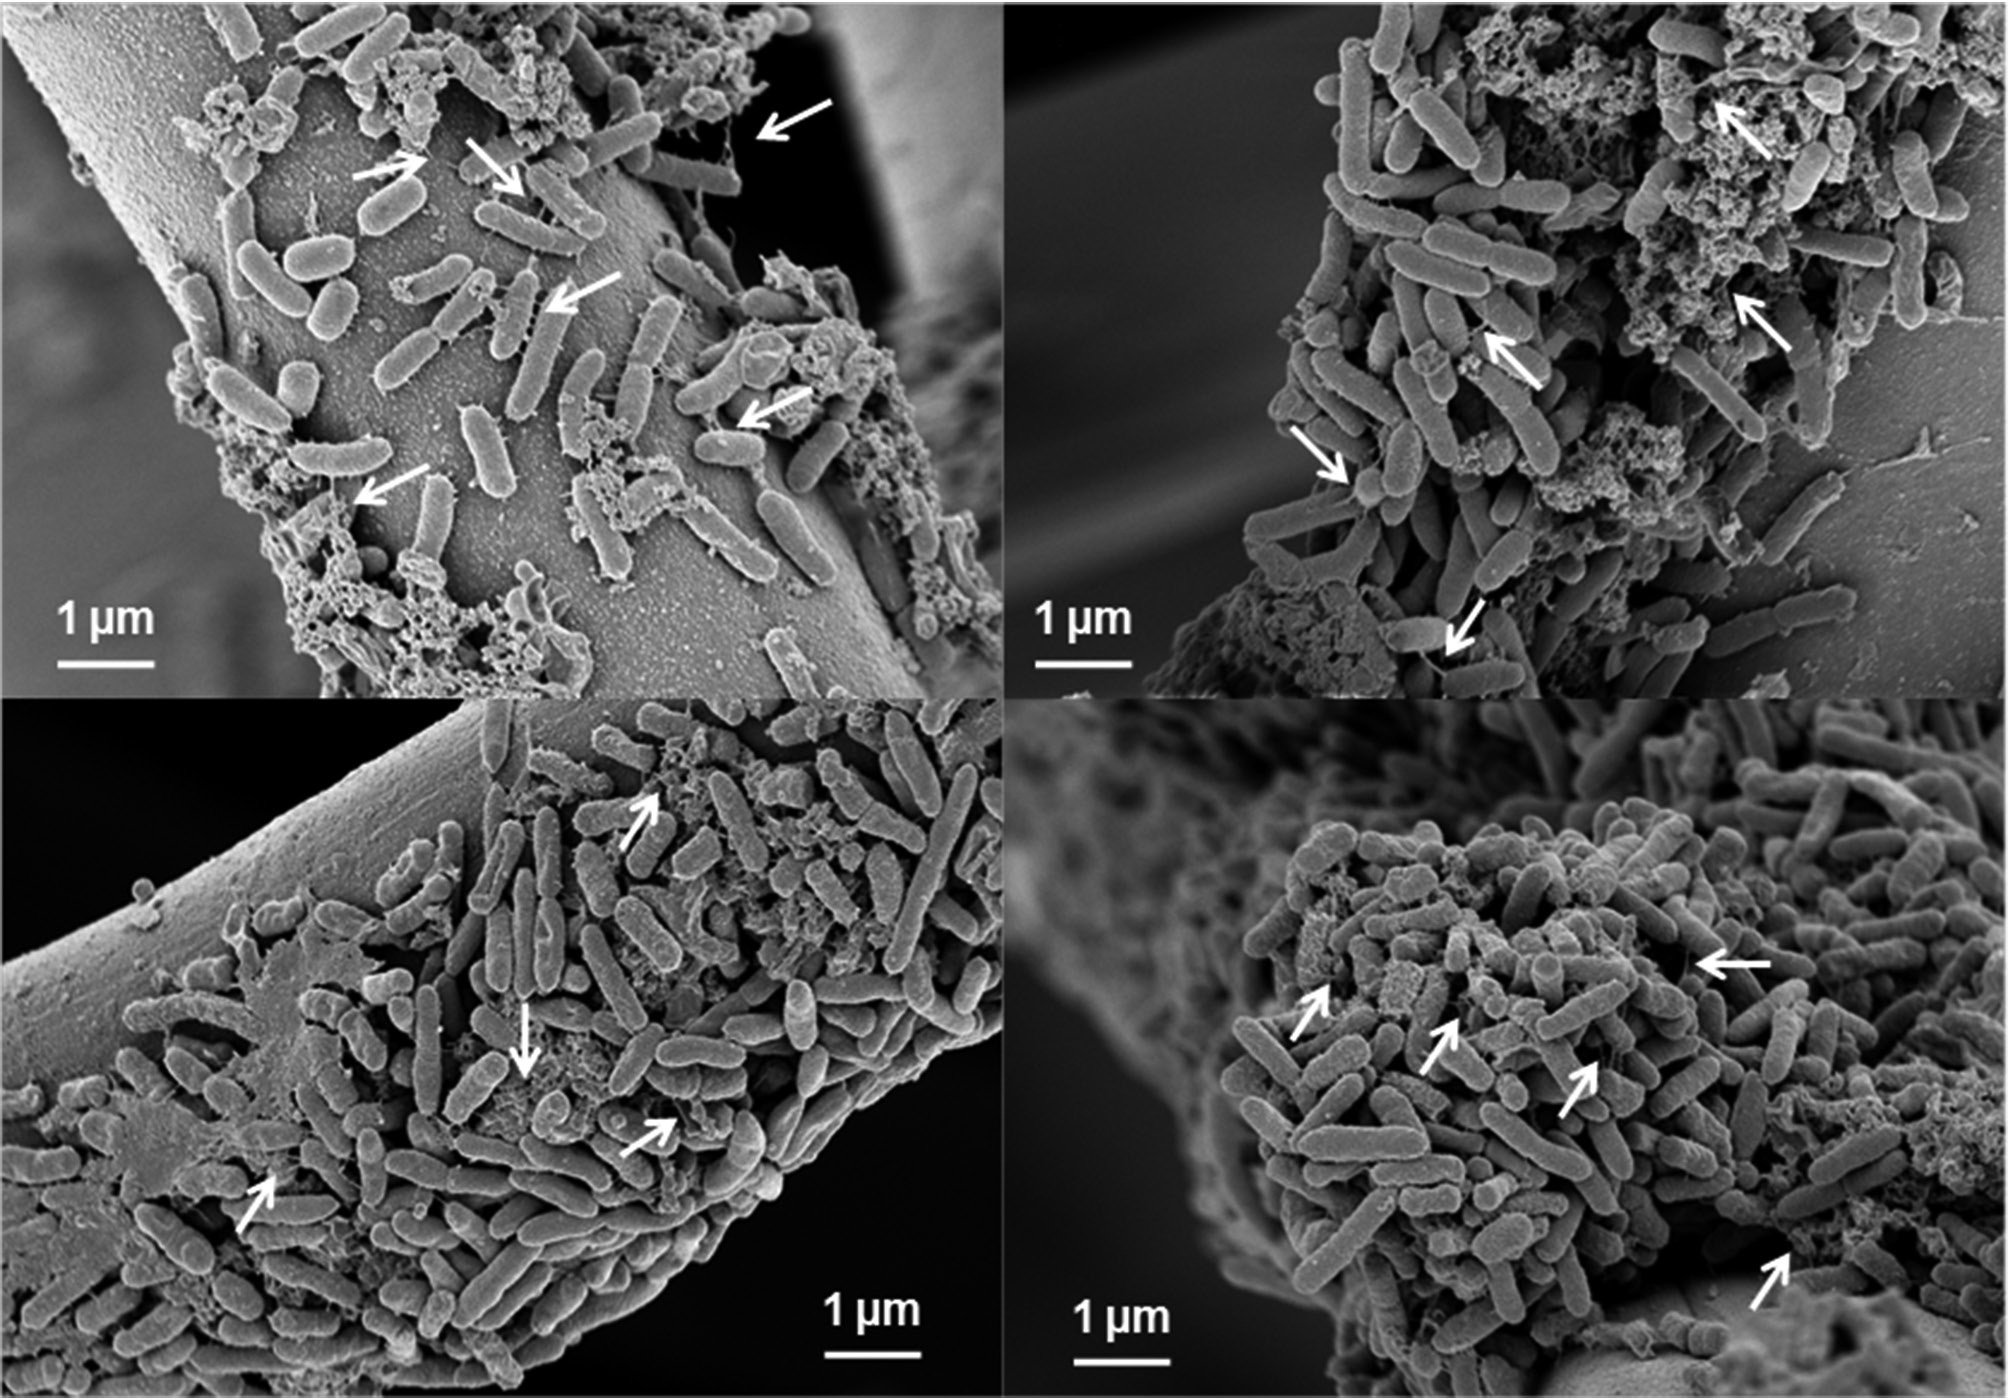 Scanning electron microscopy images of biofilm and nano-pili (indicated by arrows) formed on the anode at (a) 100 hr, (b) 137 hr, (c) 194
hr, and (d) 255 hr of microbial fuel cell operation.